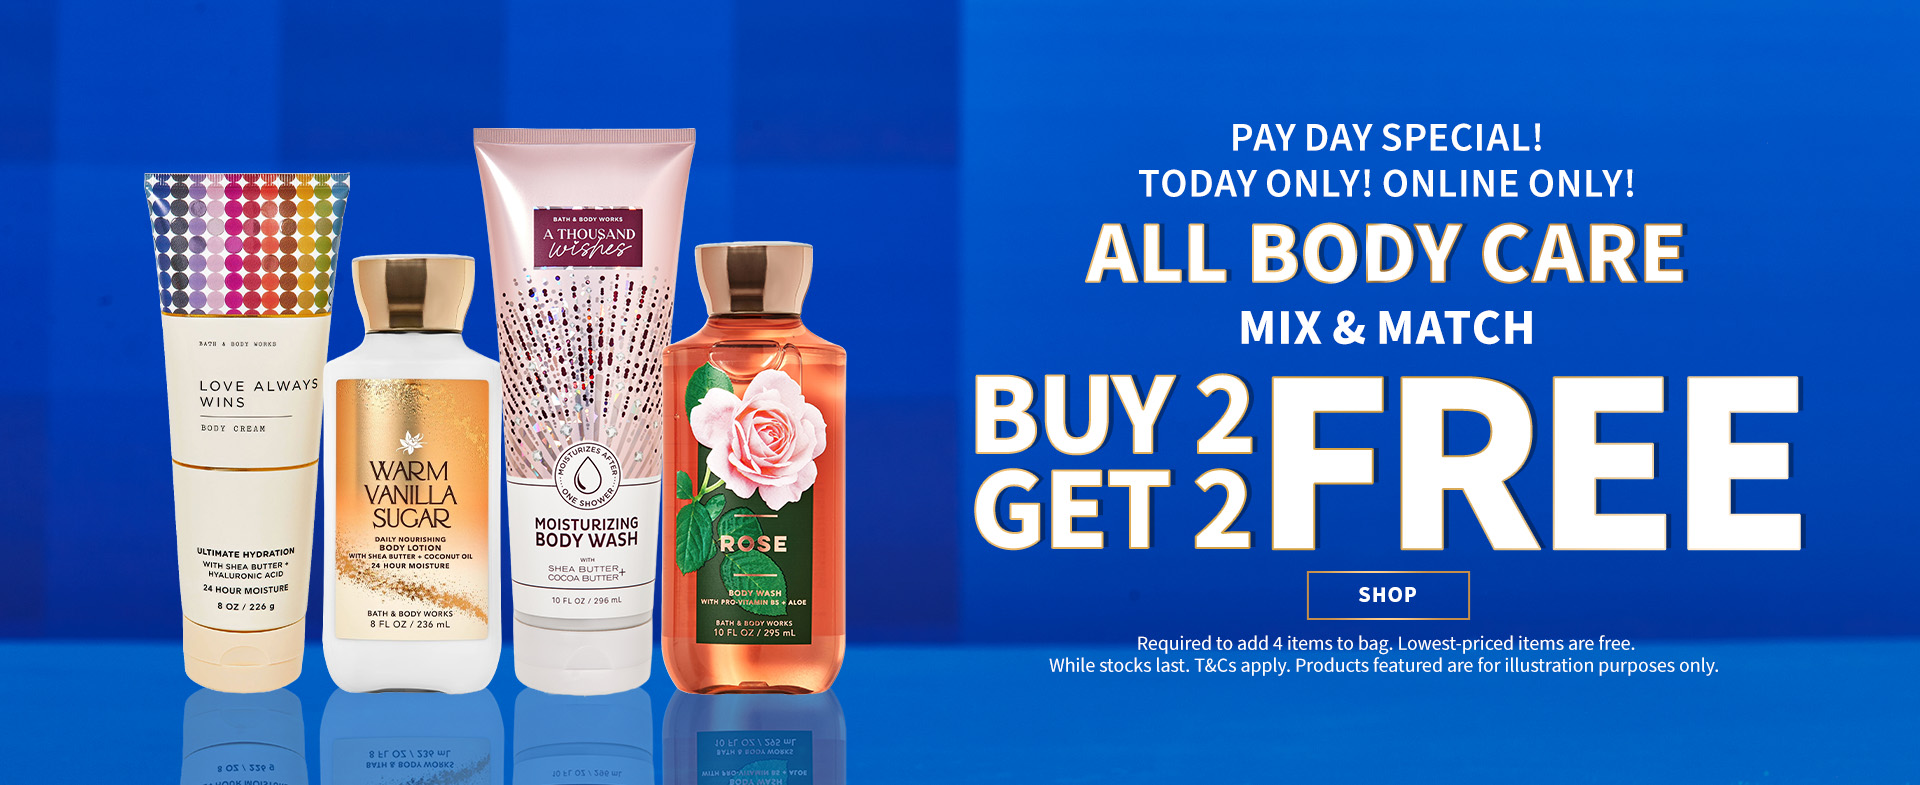 LIMITED TIME ONLY! ALL BODY CARE B2G2